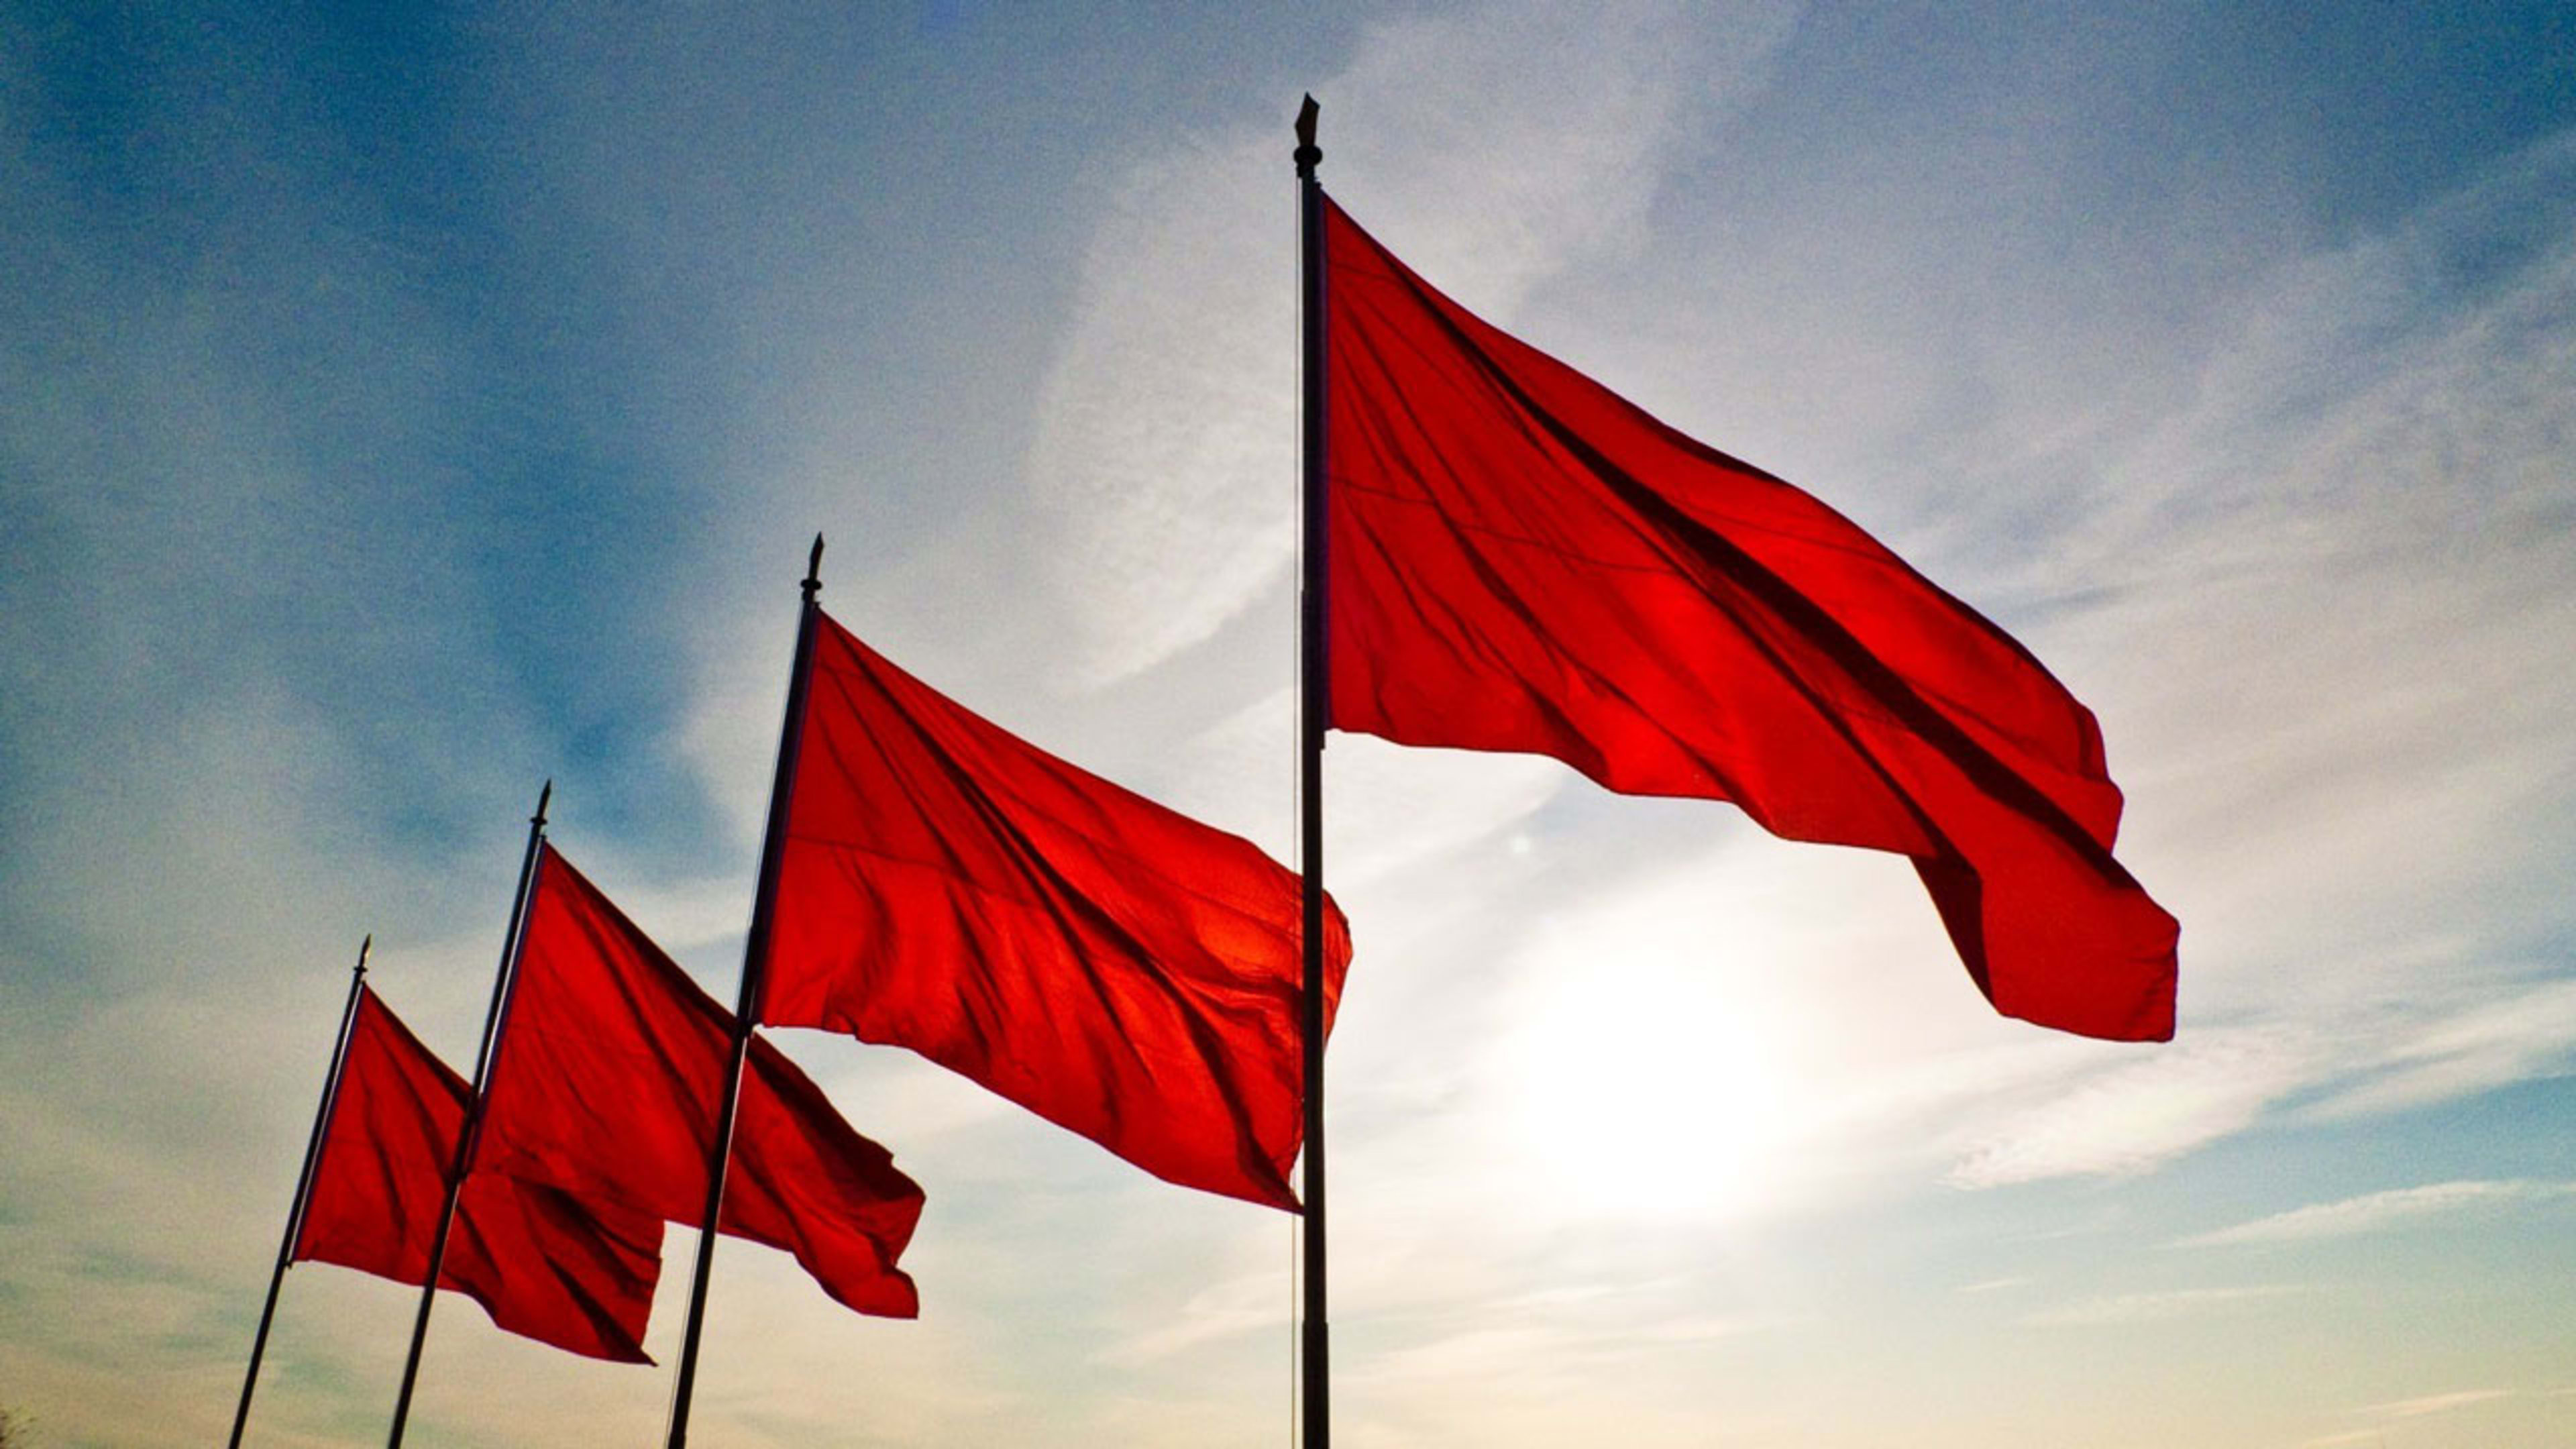 5 Red Flags That You Made A Bad Hire